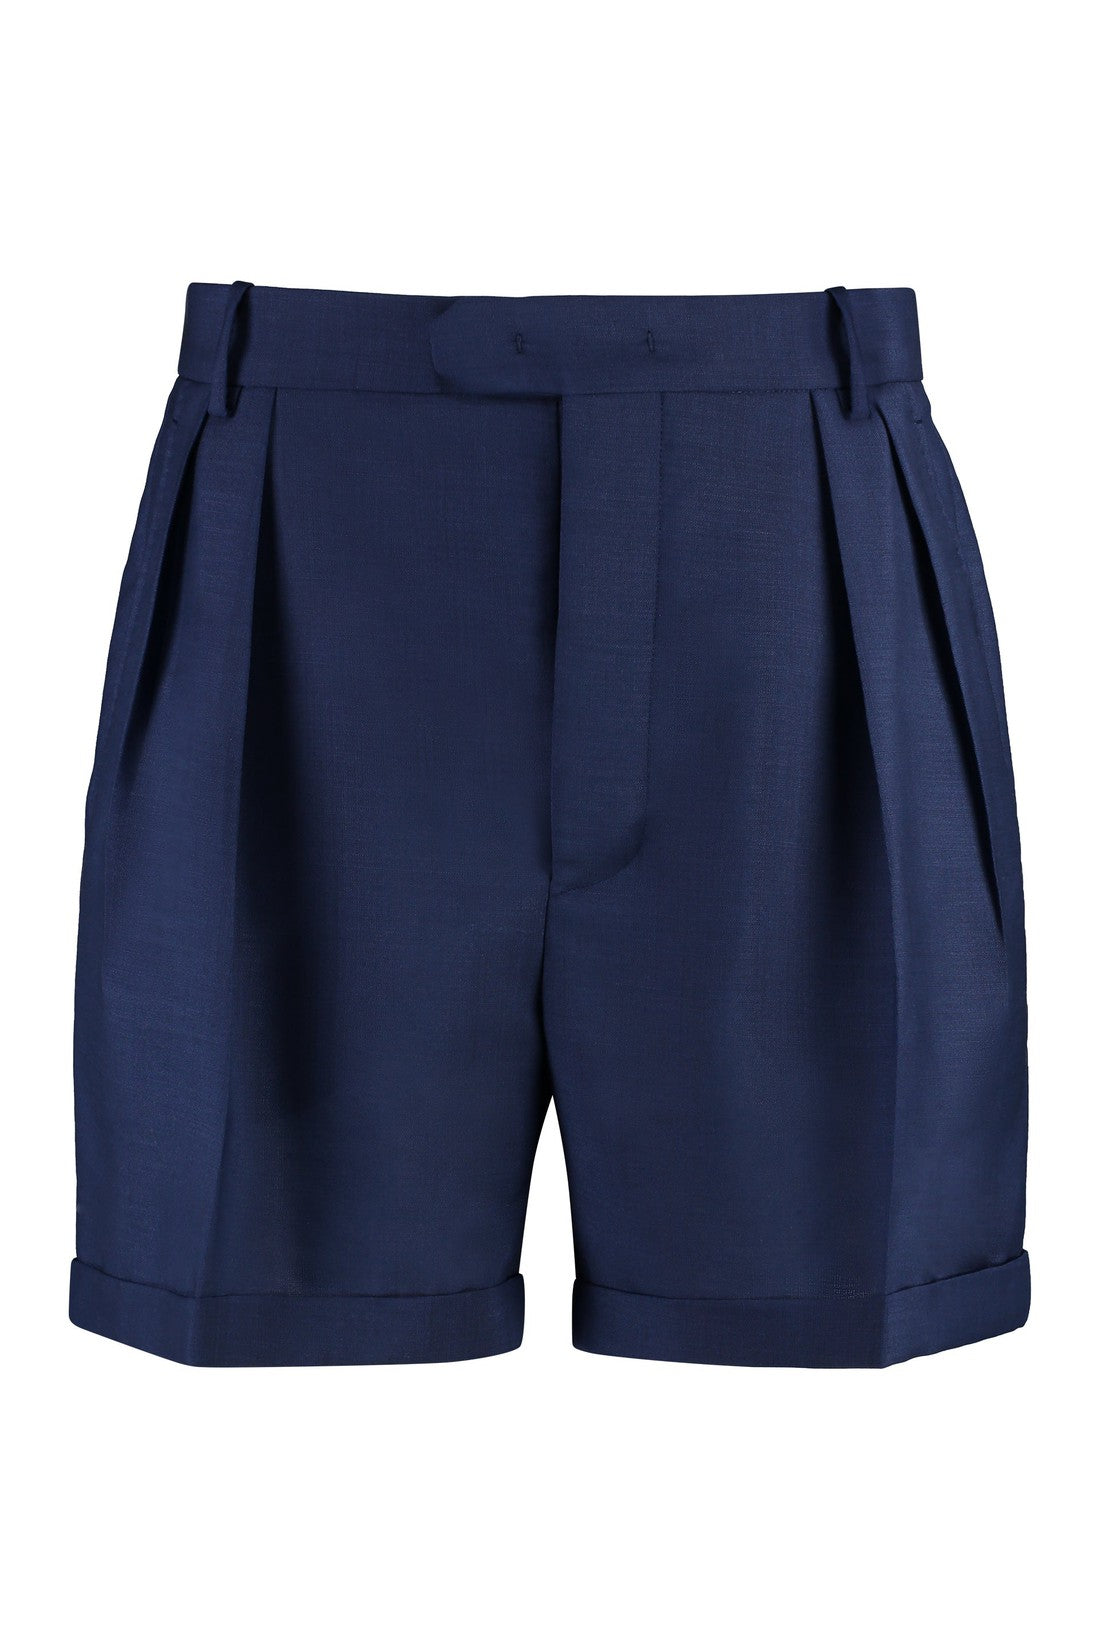 Bally-OUTLET-SALE-Virgin wool and mohair bermuda-shorts-ARCHIVIST